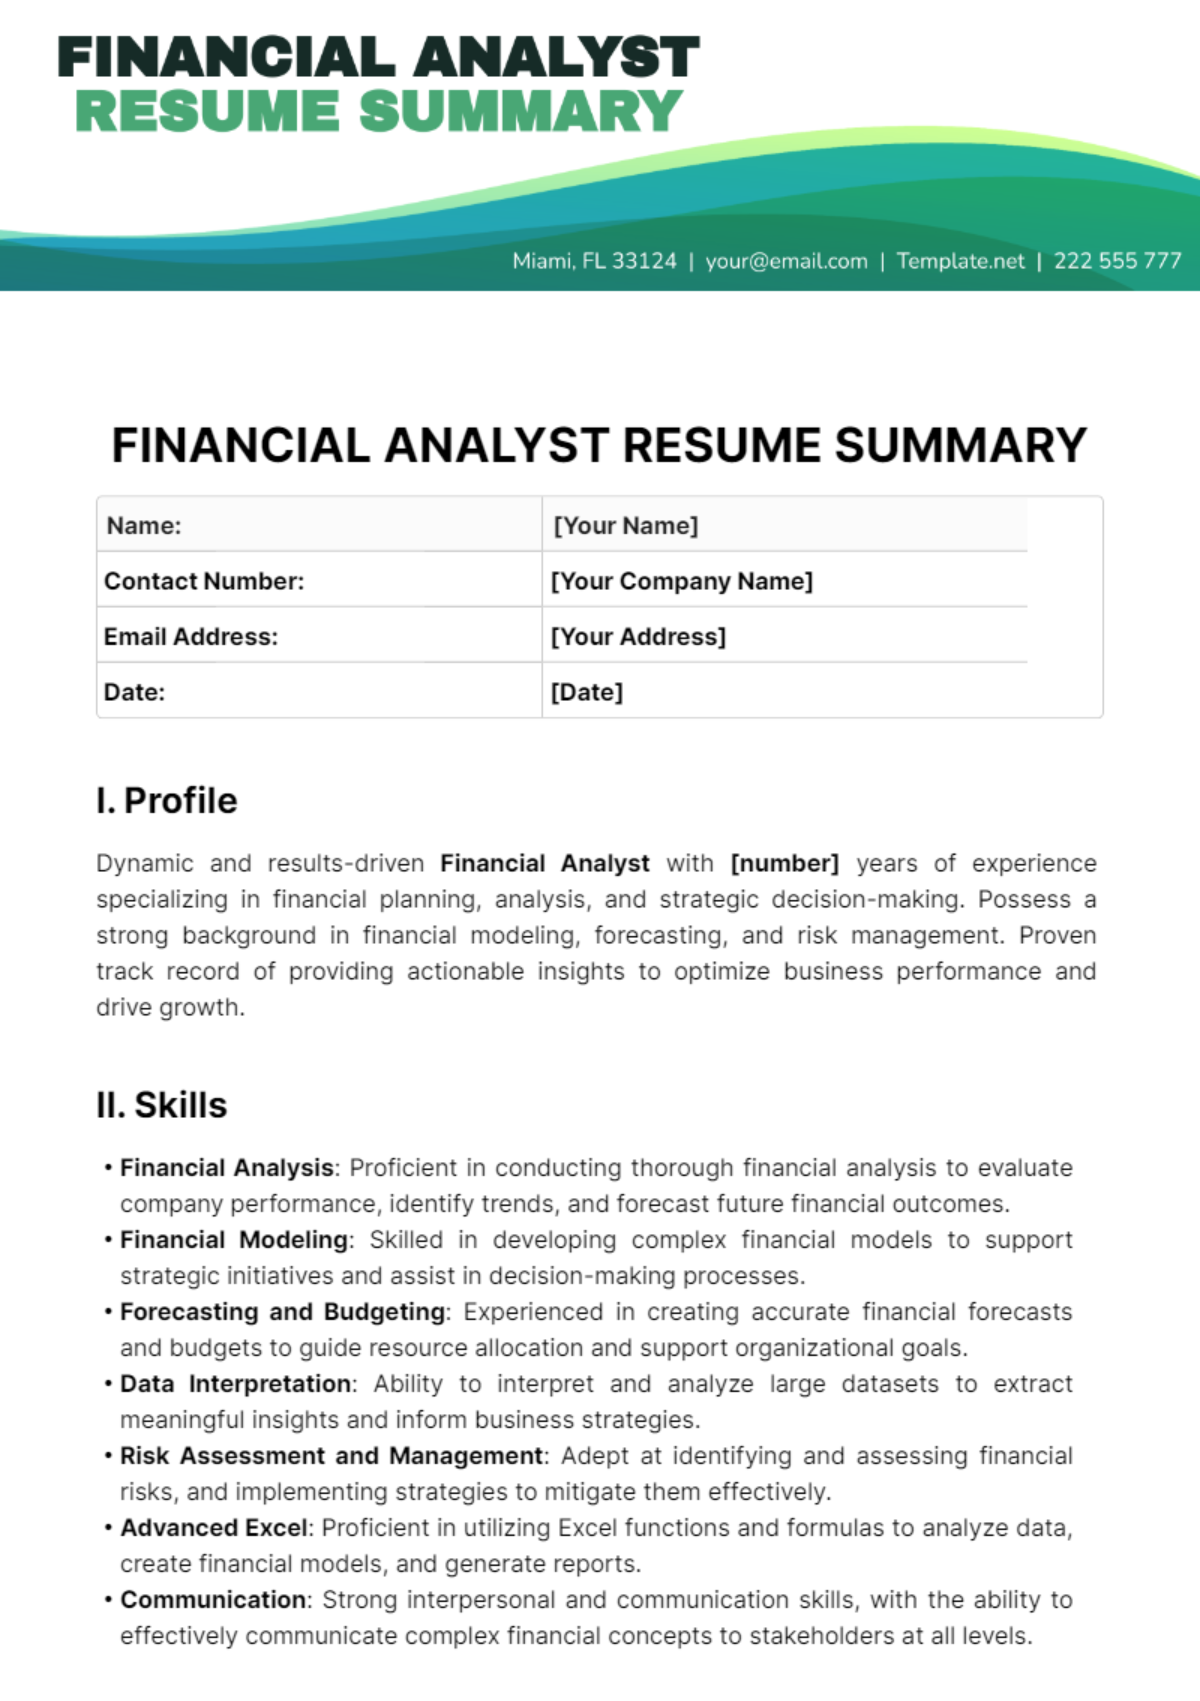 Financial Analyst Resume Summary Template